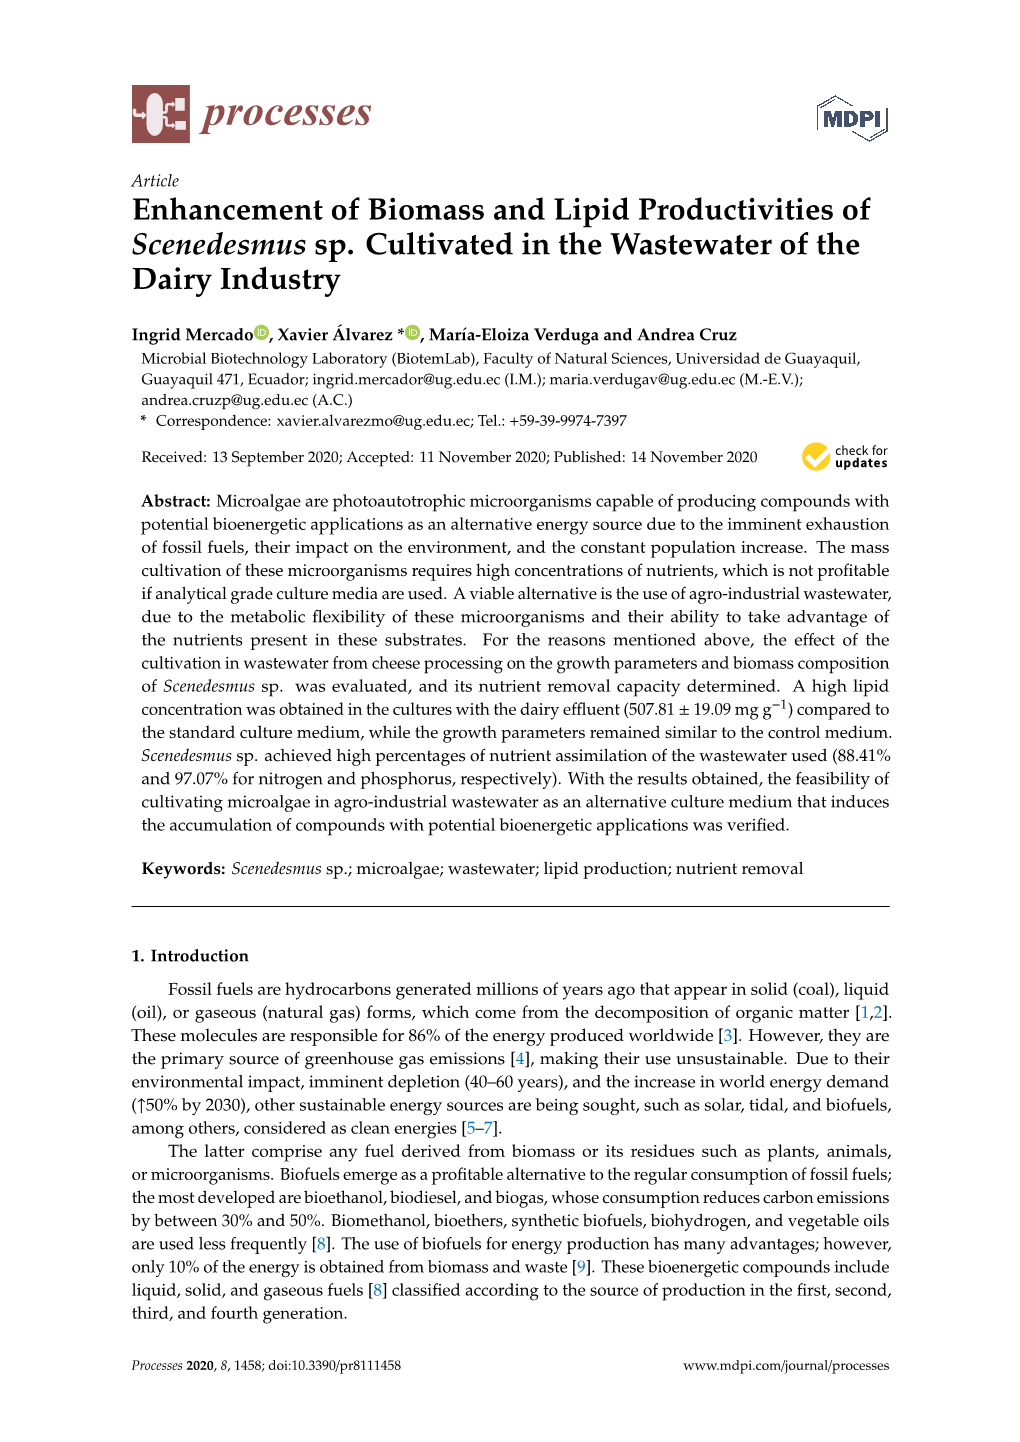 Enhancement of Biomass and Lipid Productivities of Scenedesmus Sp. Cultivated in the Wastewater of the Dairy Industry